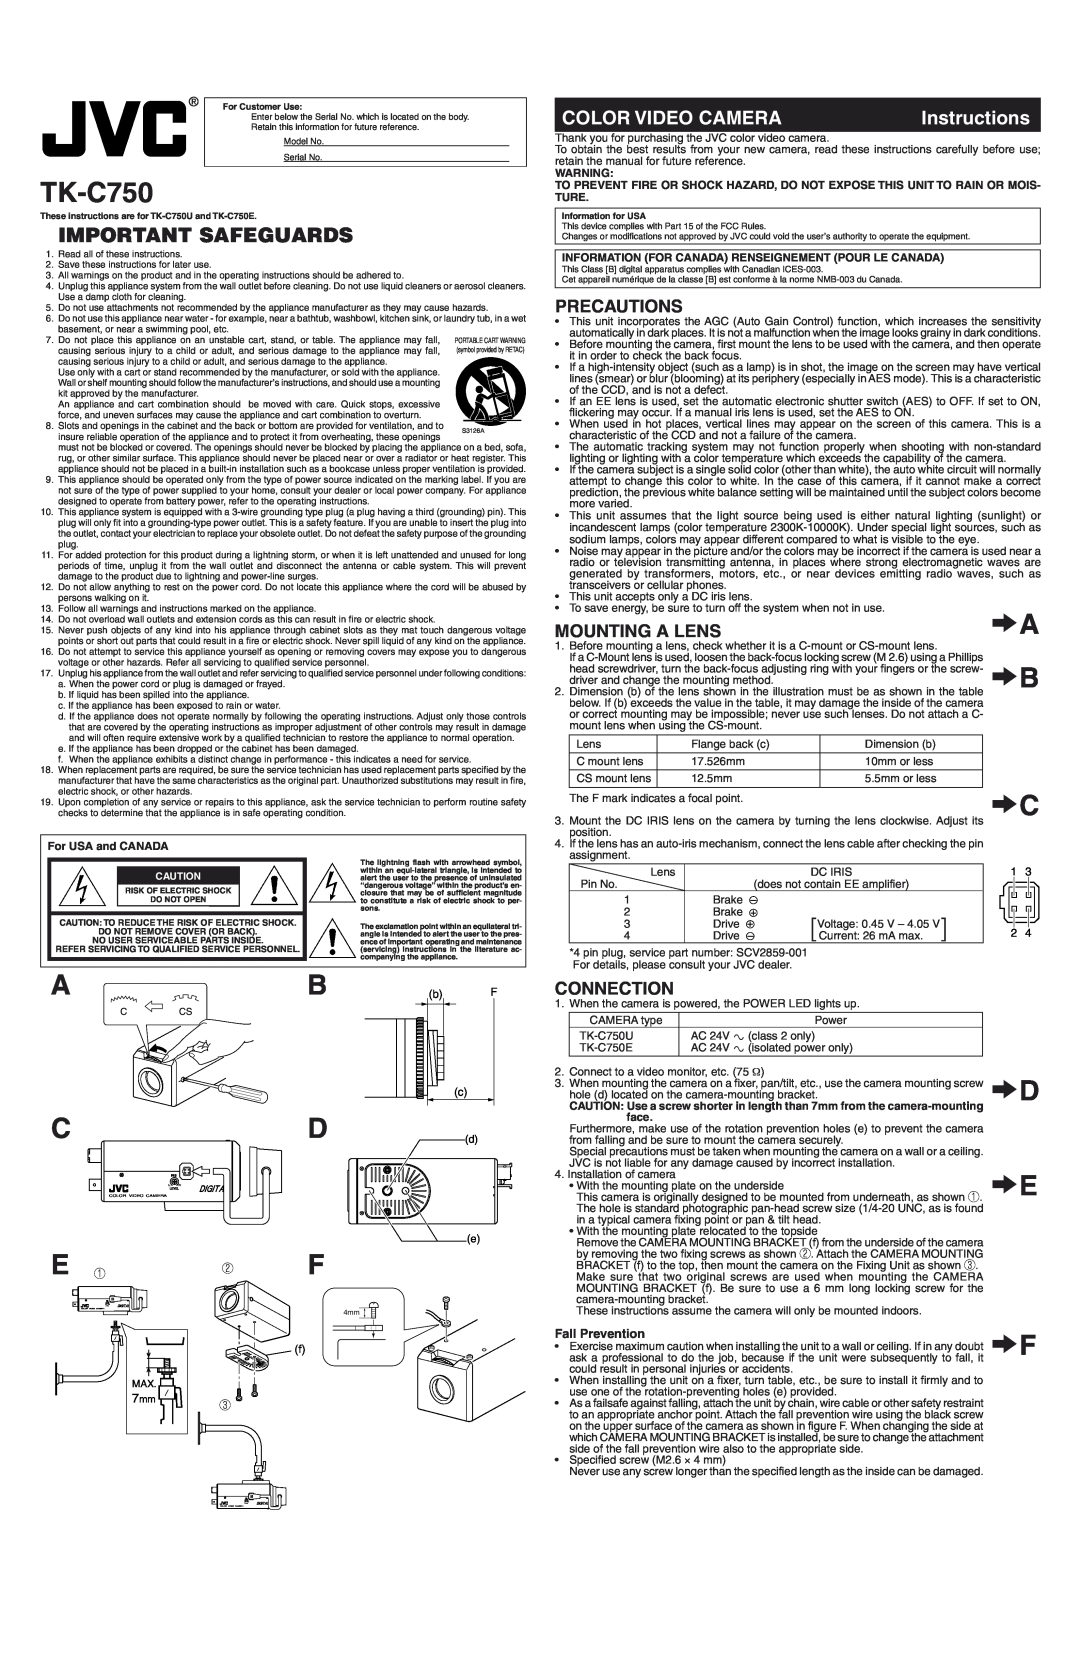 JVC TK-C750 operating instructions Precautions, Mounting A Lens, Connection, Important Safeguards, Color Video Camera 